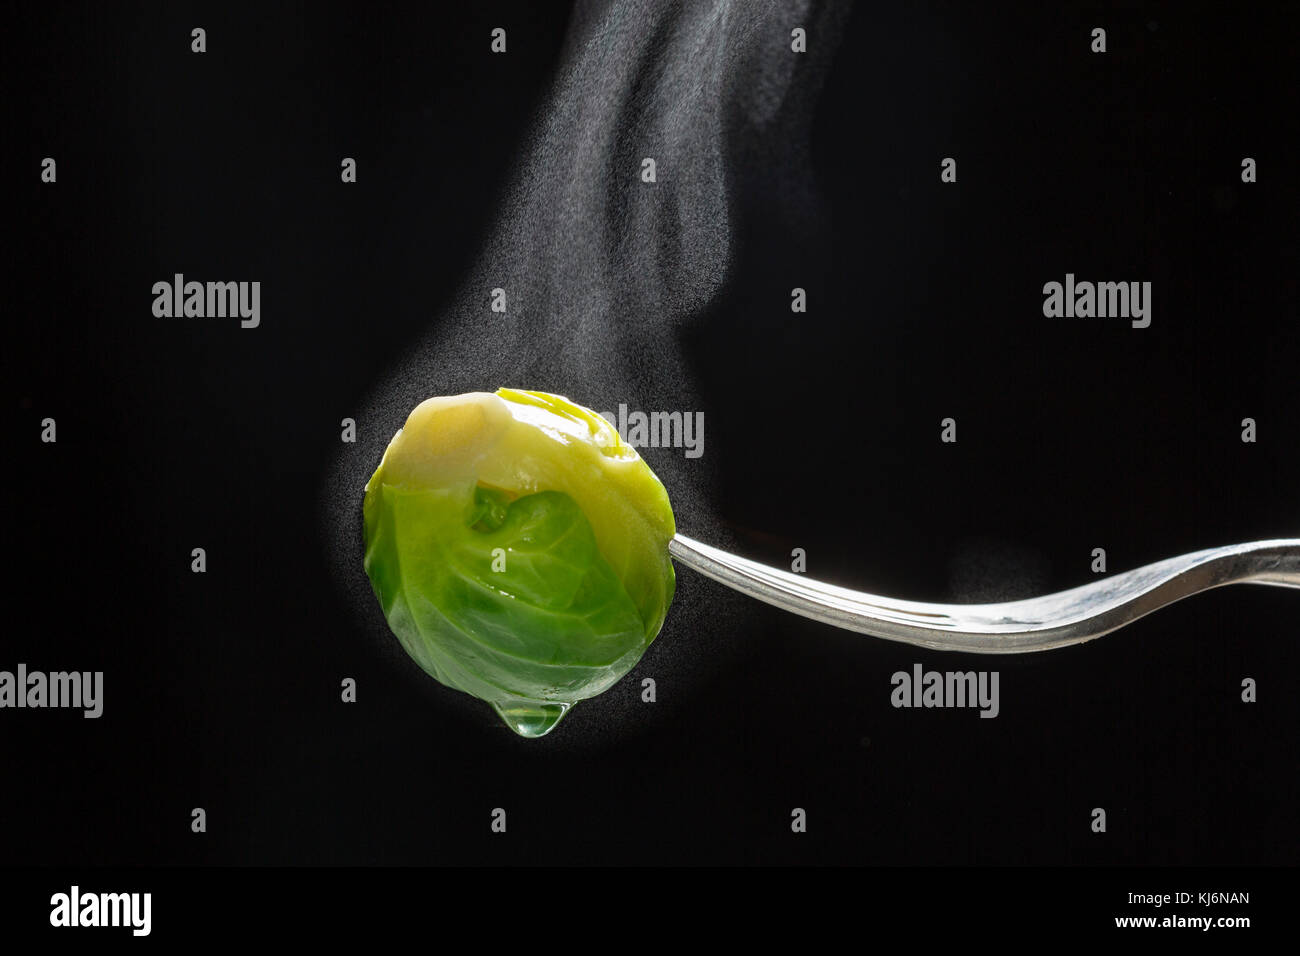 Steaming, just cooked, Brussels sprout on a fork. Stock Photo